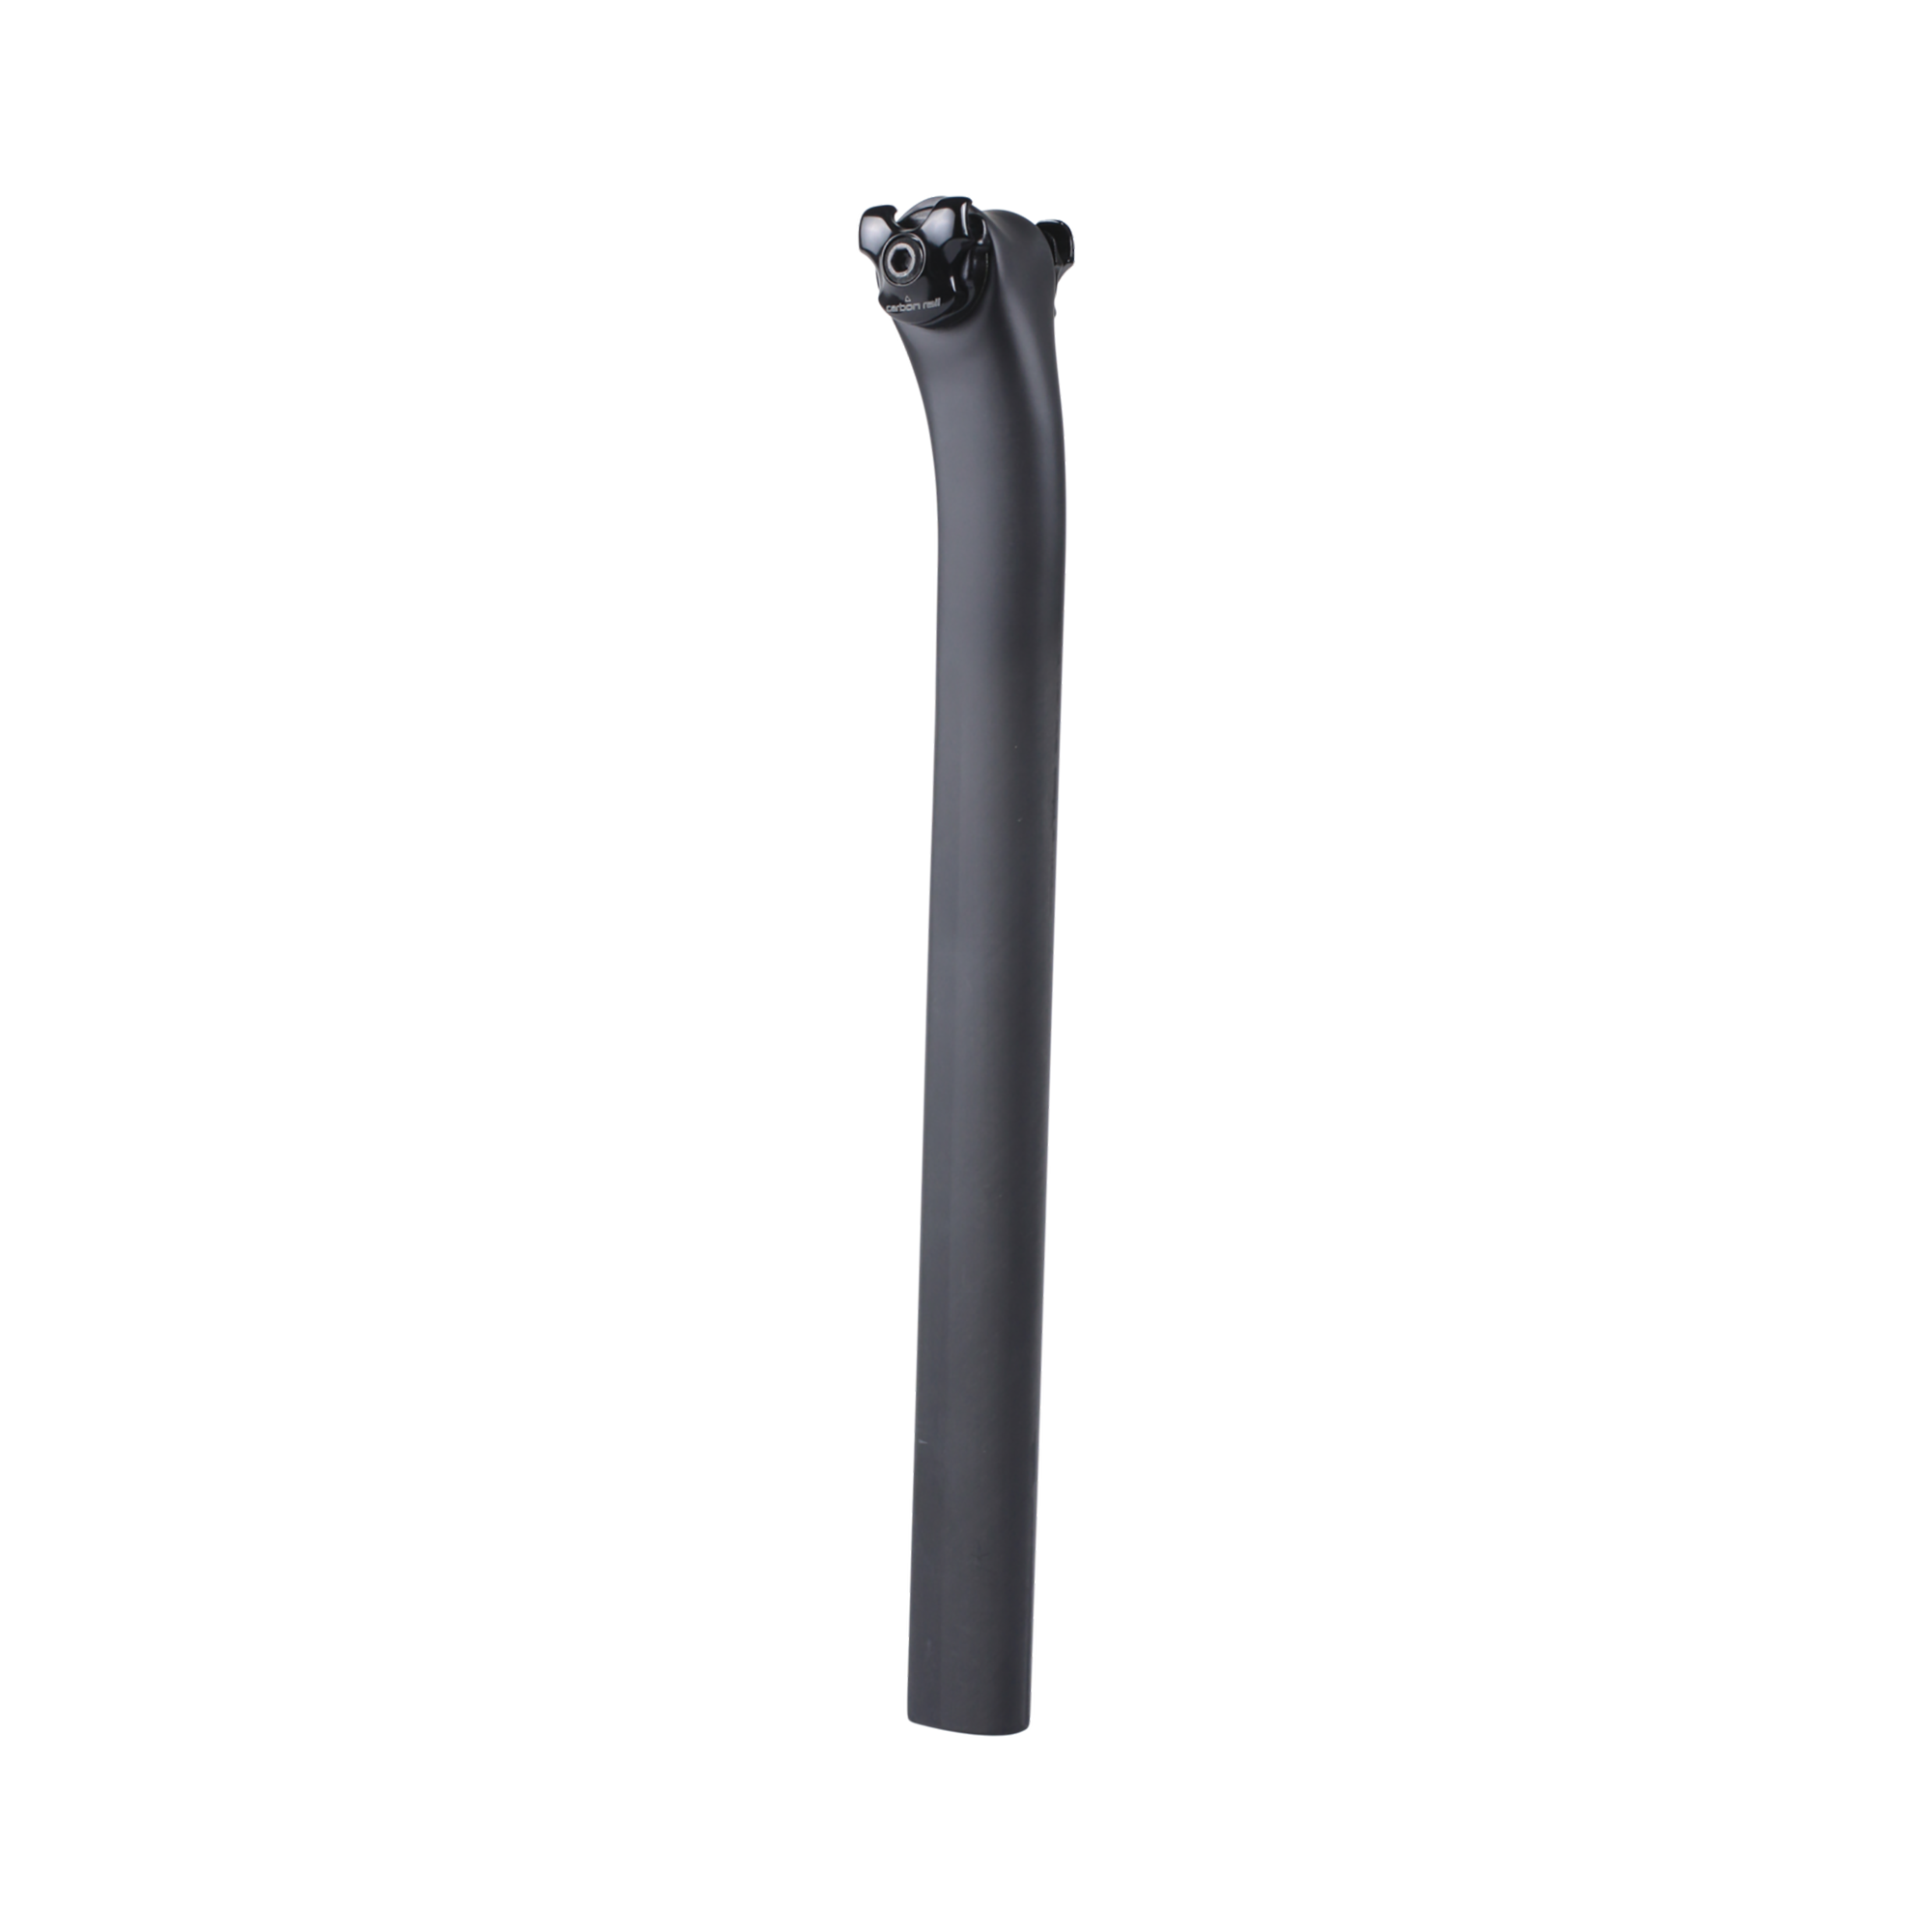 S-Works FACT Carbon Tarmac SL6 Seat Post, 20mm Offset, 380mm